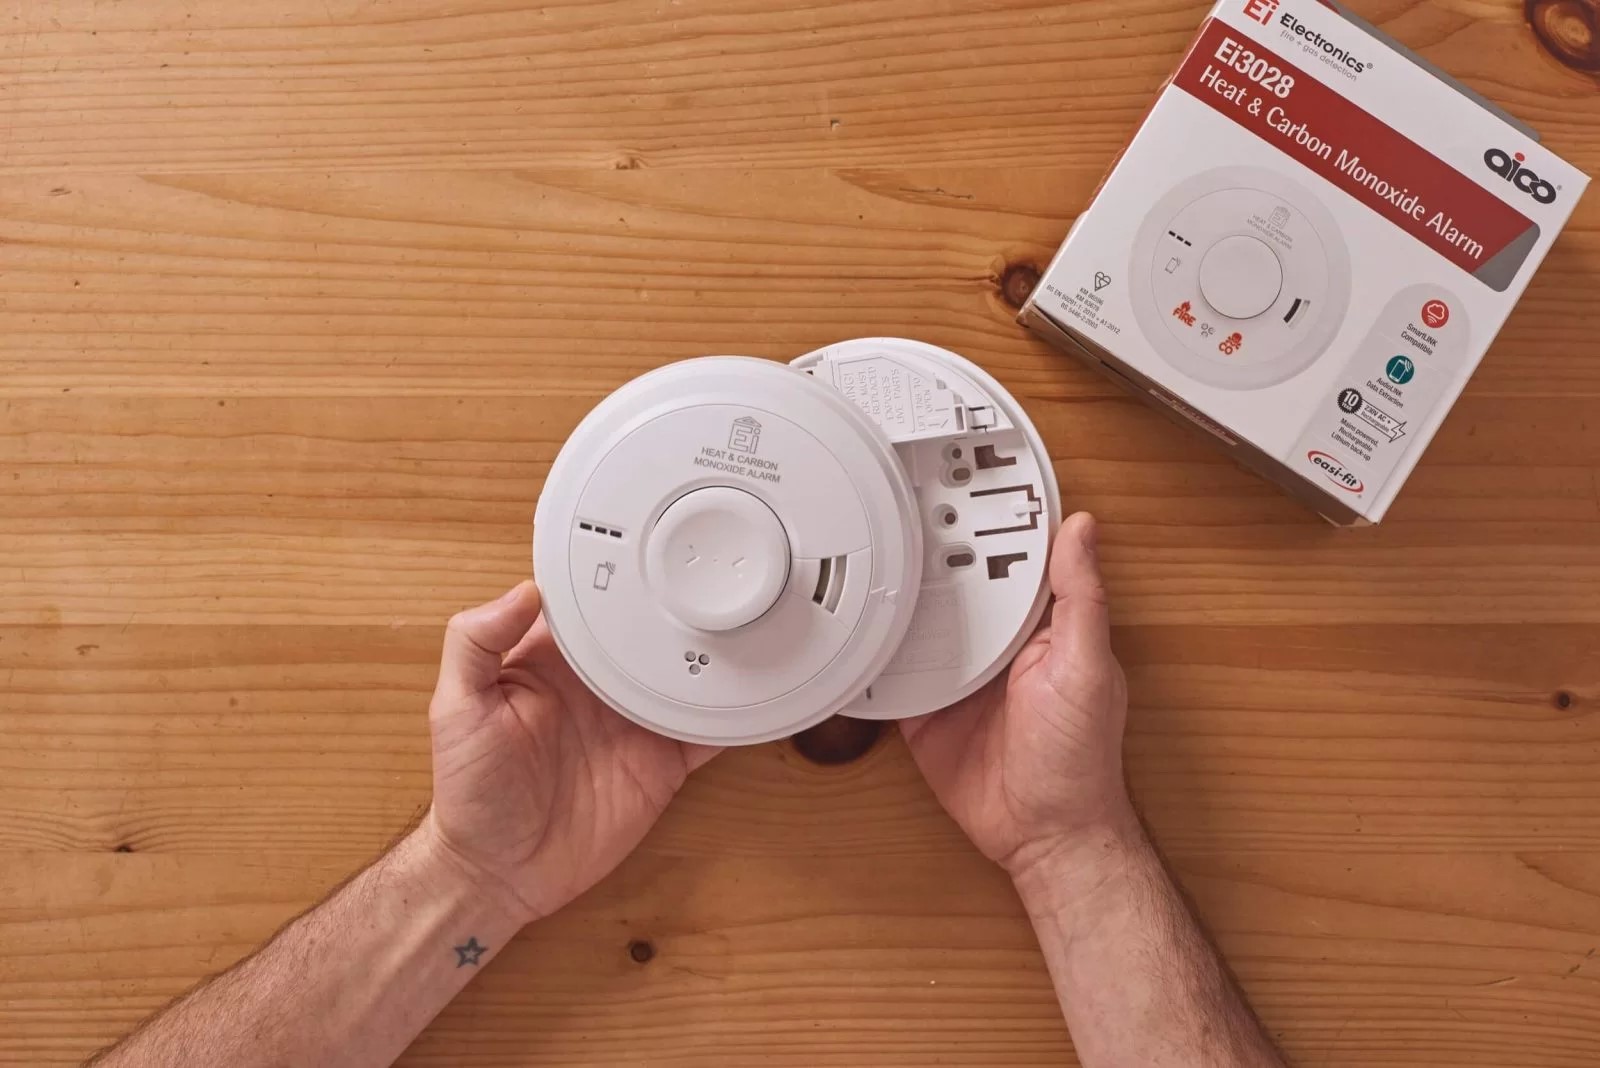 Why Is It A Good Idea To Have A Carbon Monoxide Detector In The Home?